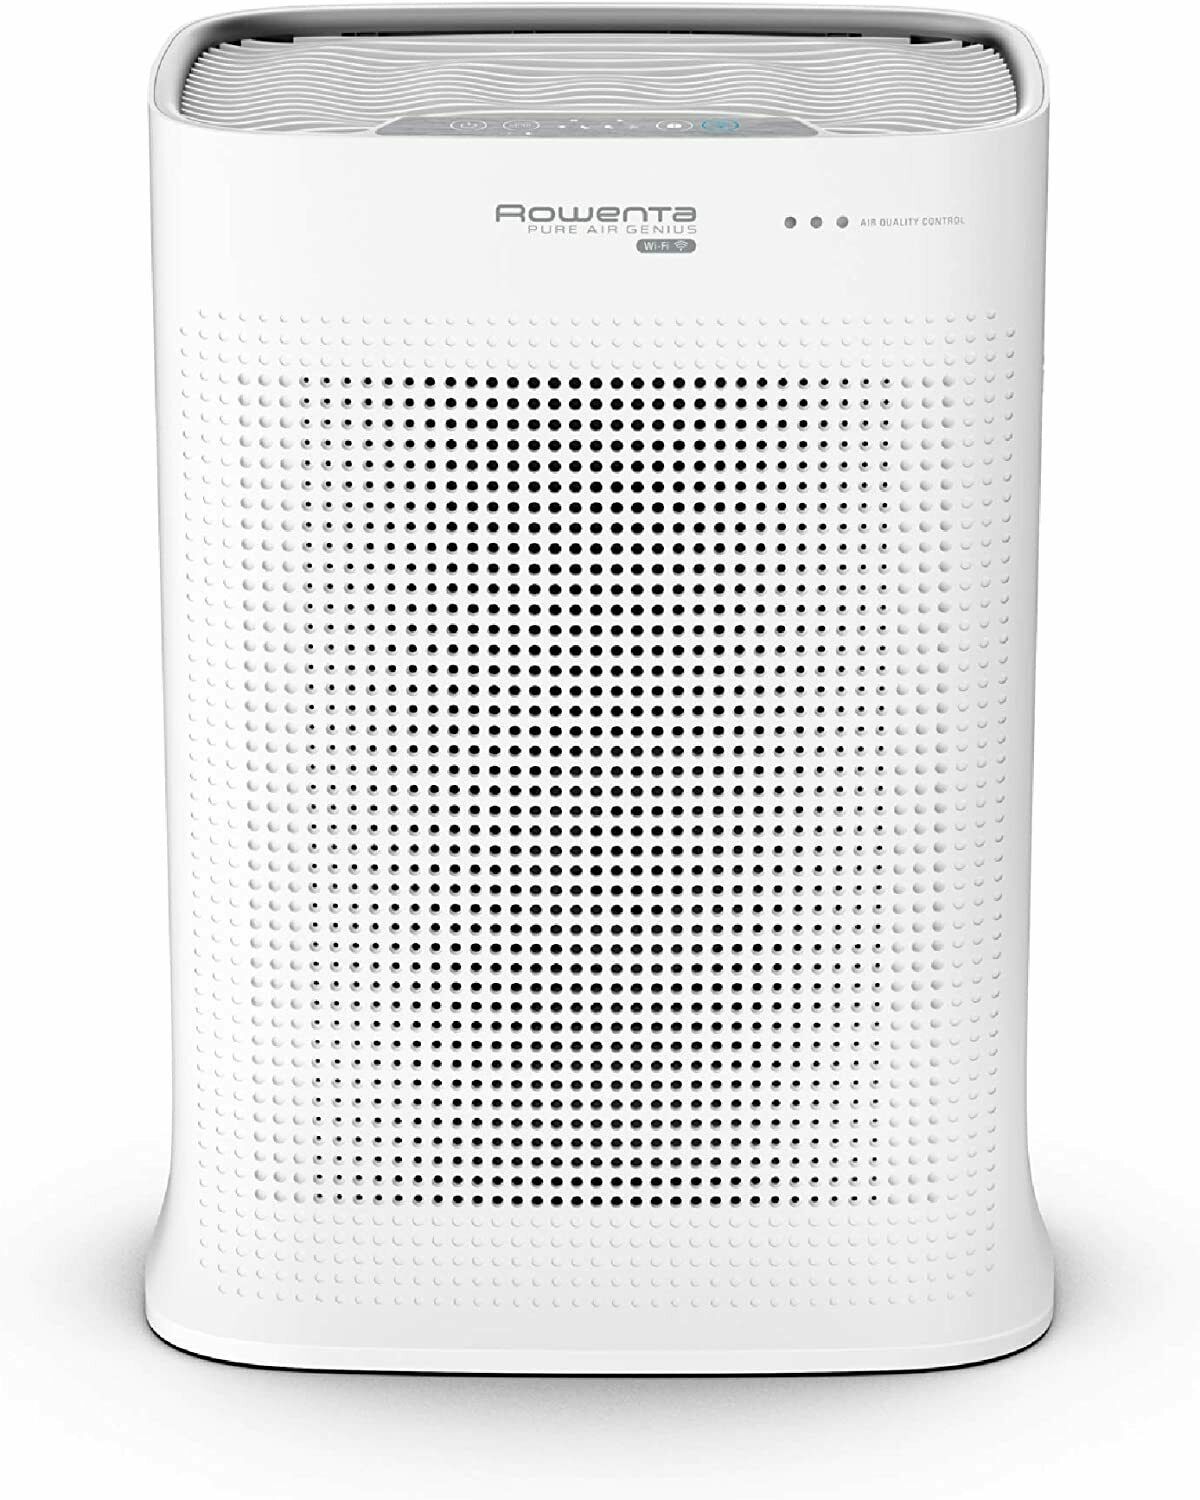 New Rowenta PU3080 Pure Air Purifier,HEPA and Active Carbon Filters.WIFI Conn... - $93.49